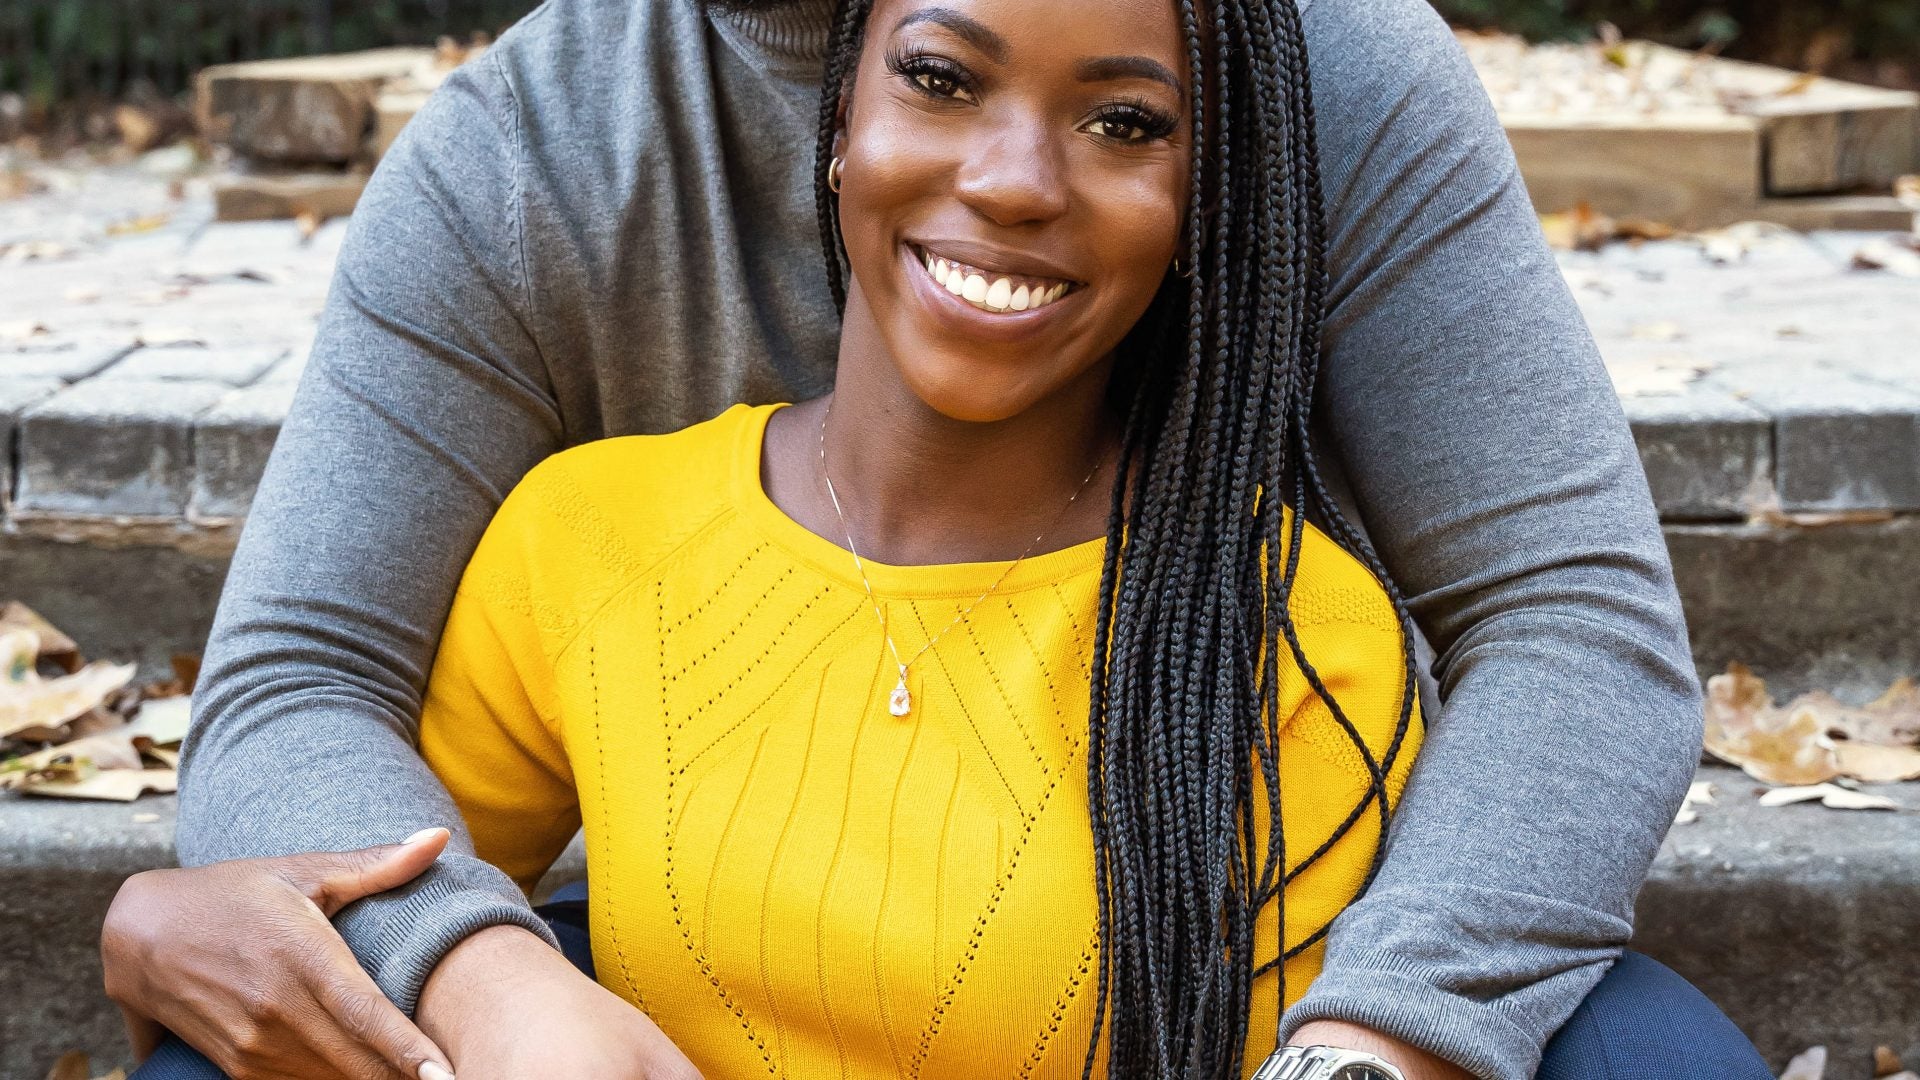 Vincent And Briana Of 'Married At First Sight' Explain The Perks Of Marrying A Stranger And Finding Love On TV